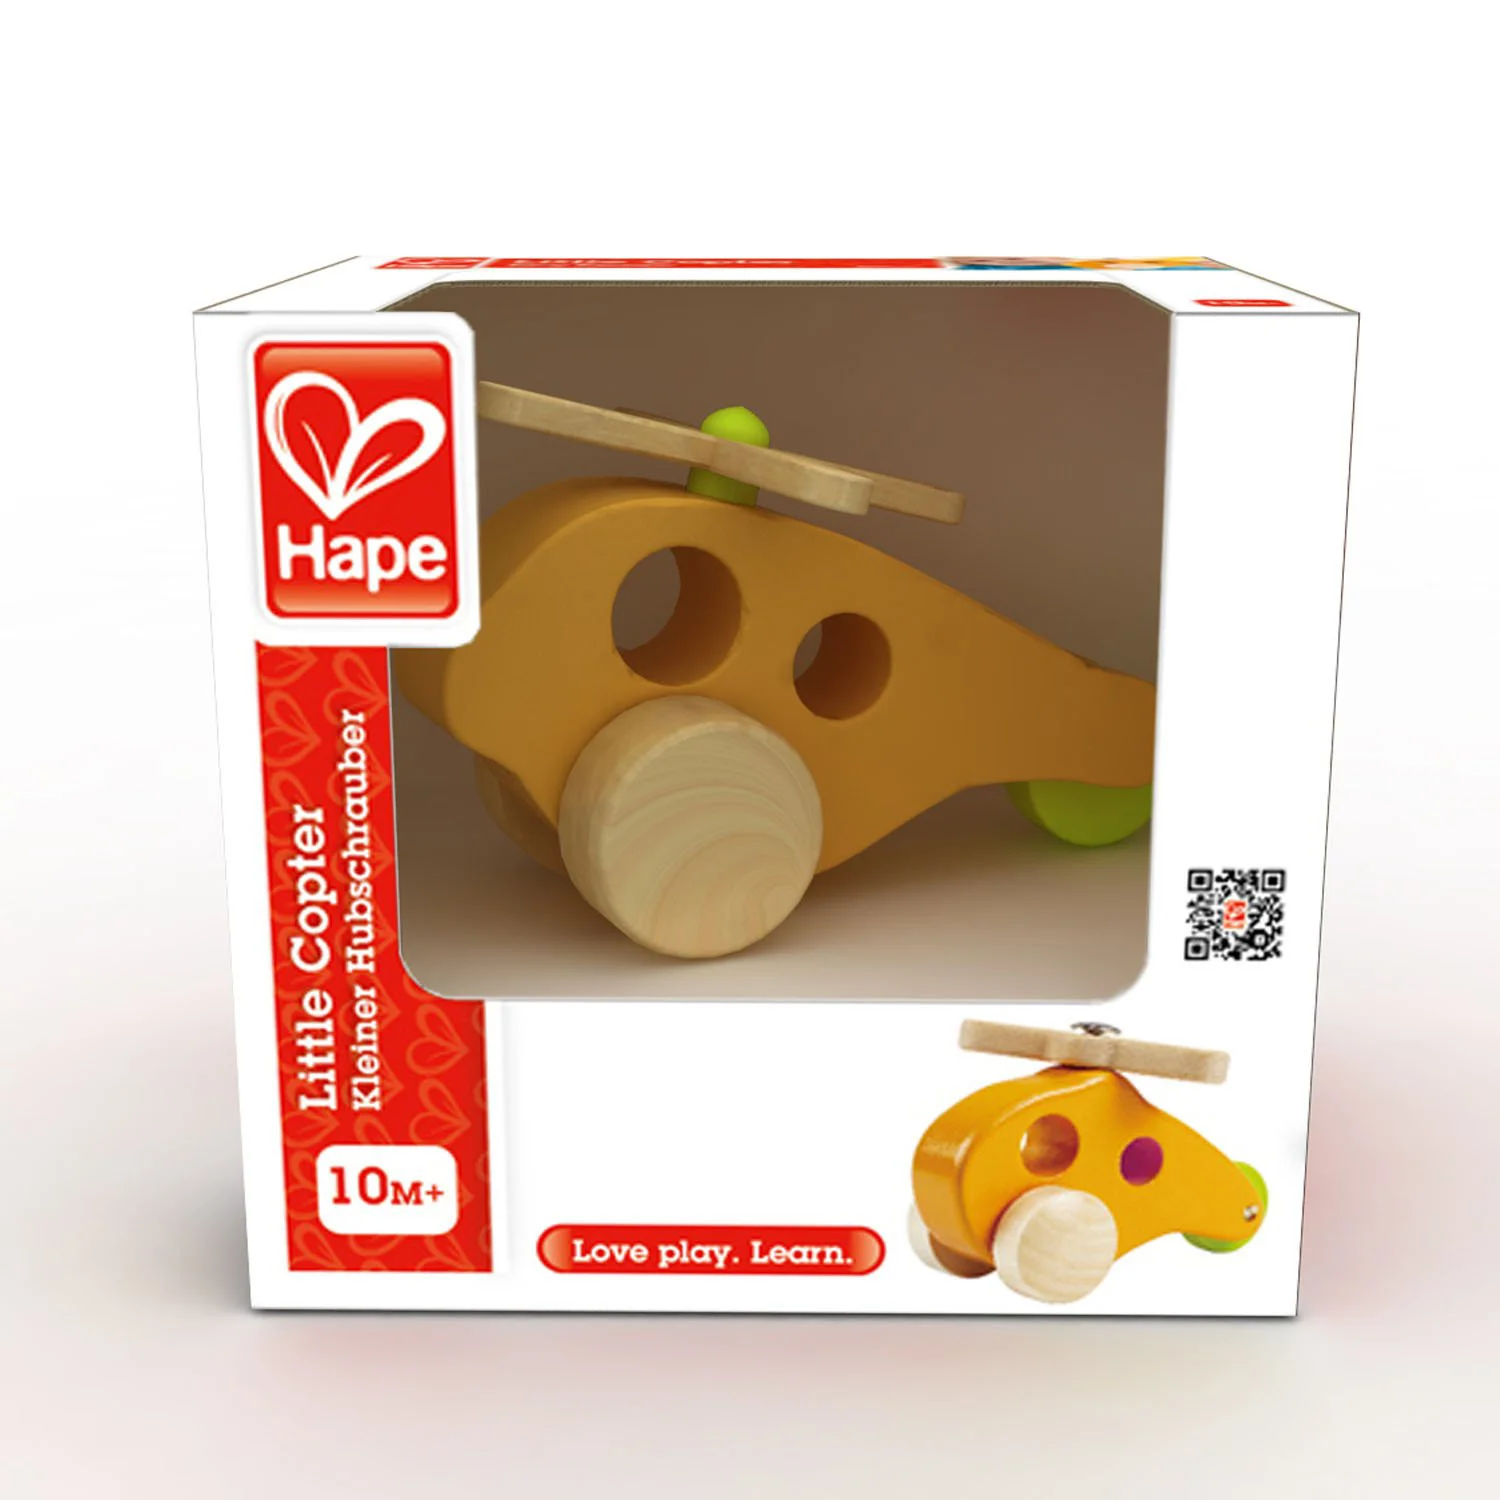 Hape - Micul Elicopter